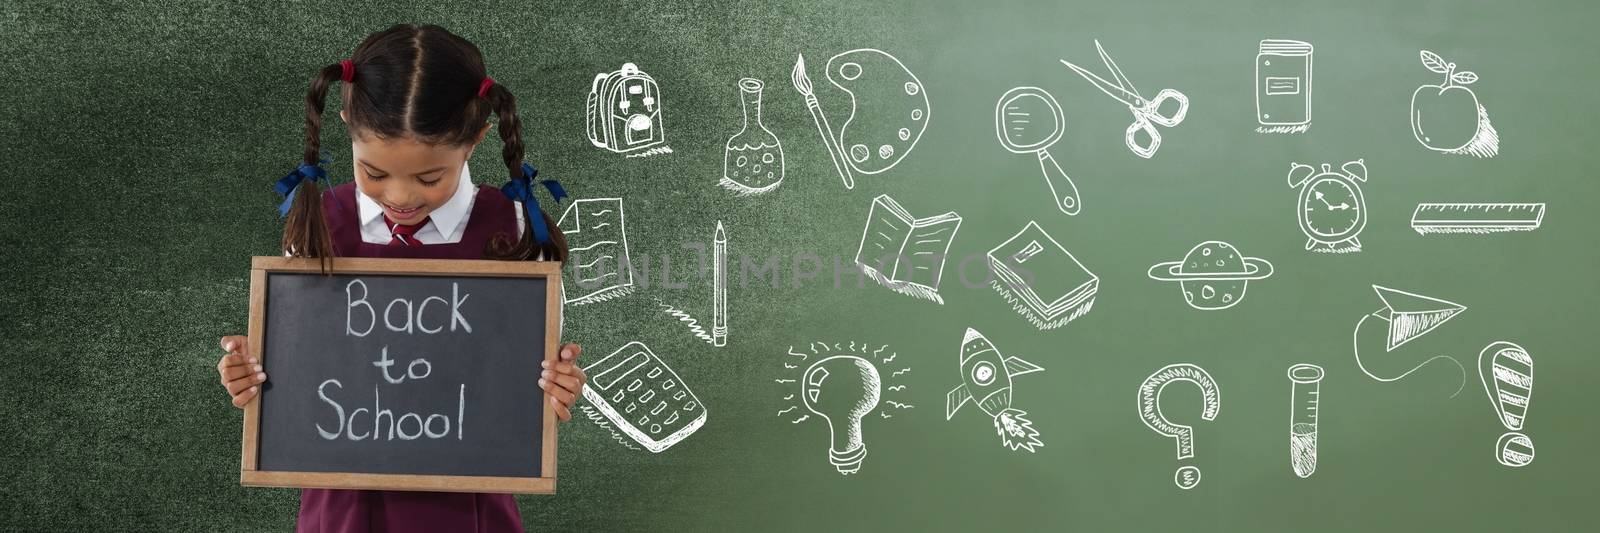 Back to School writing with School girl and Education drawing on blackboard for school by Wavebreakmedia